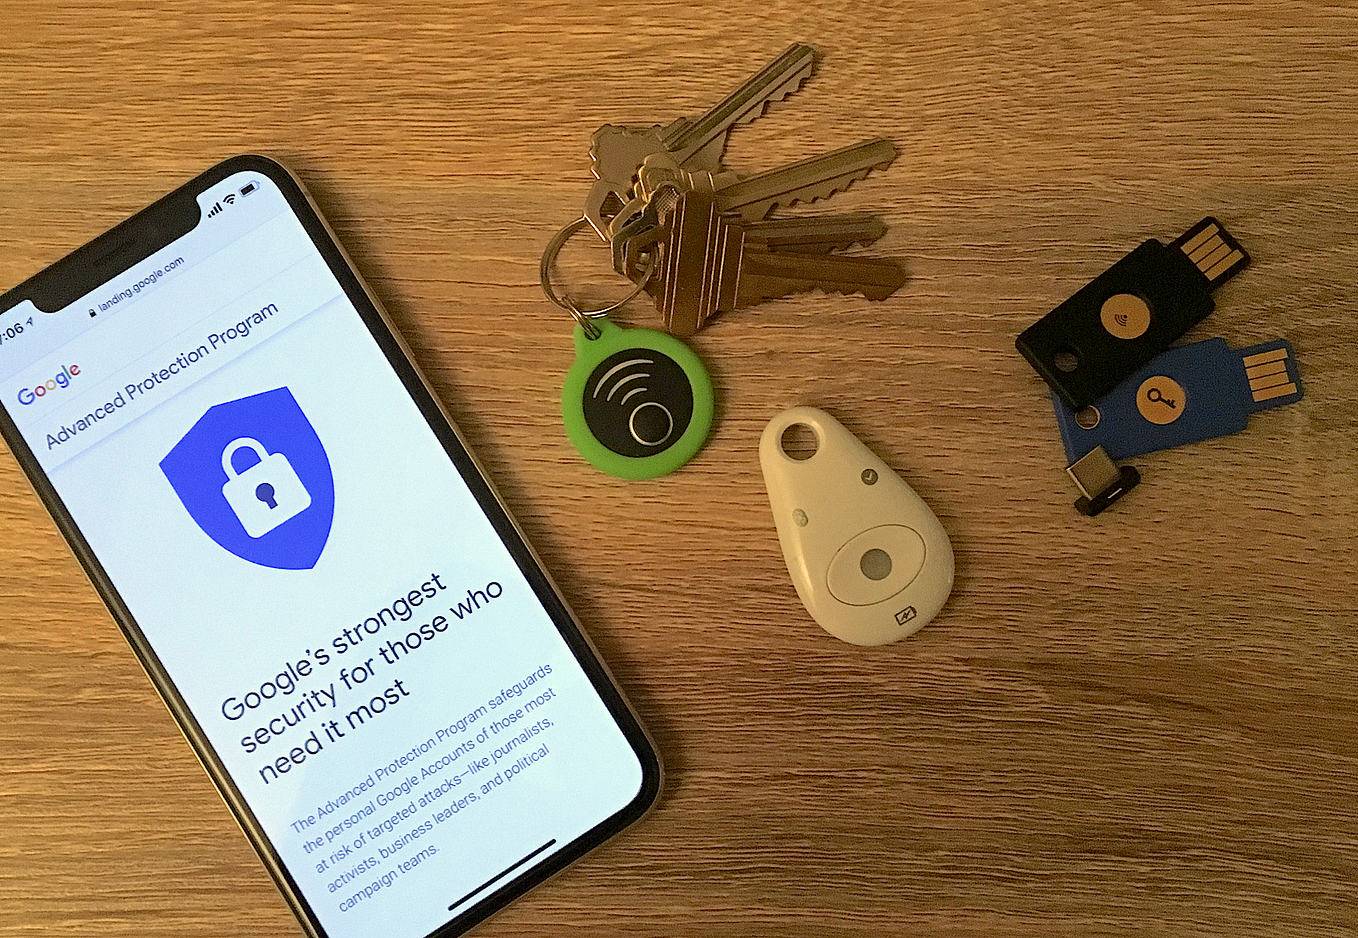 Google's Advanced Protection Program with iPhone and iPad